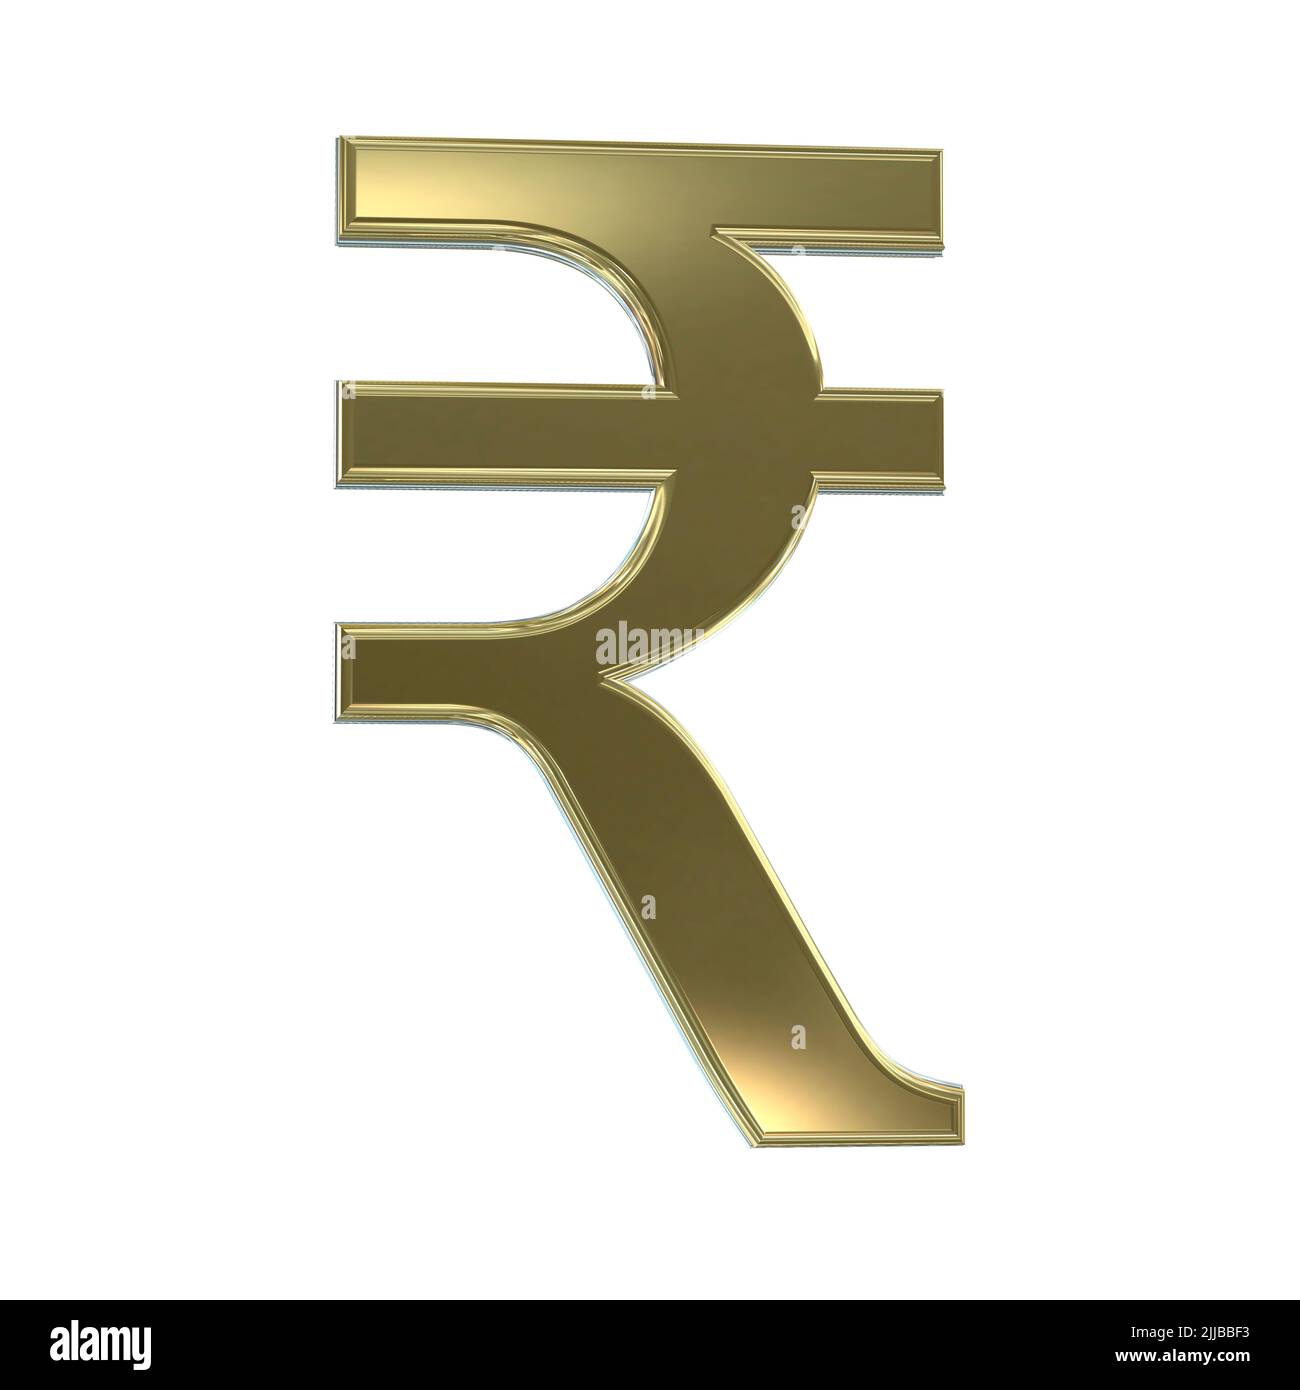 3D gold silver rupee currency symbol symbols sign signs cut out isolated on white background Stock Photo